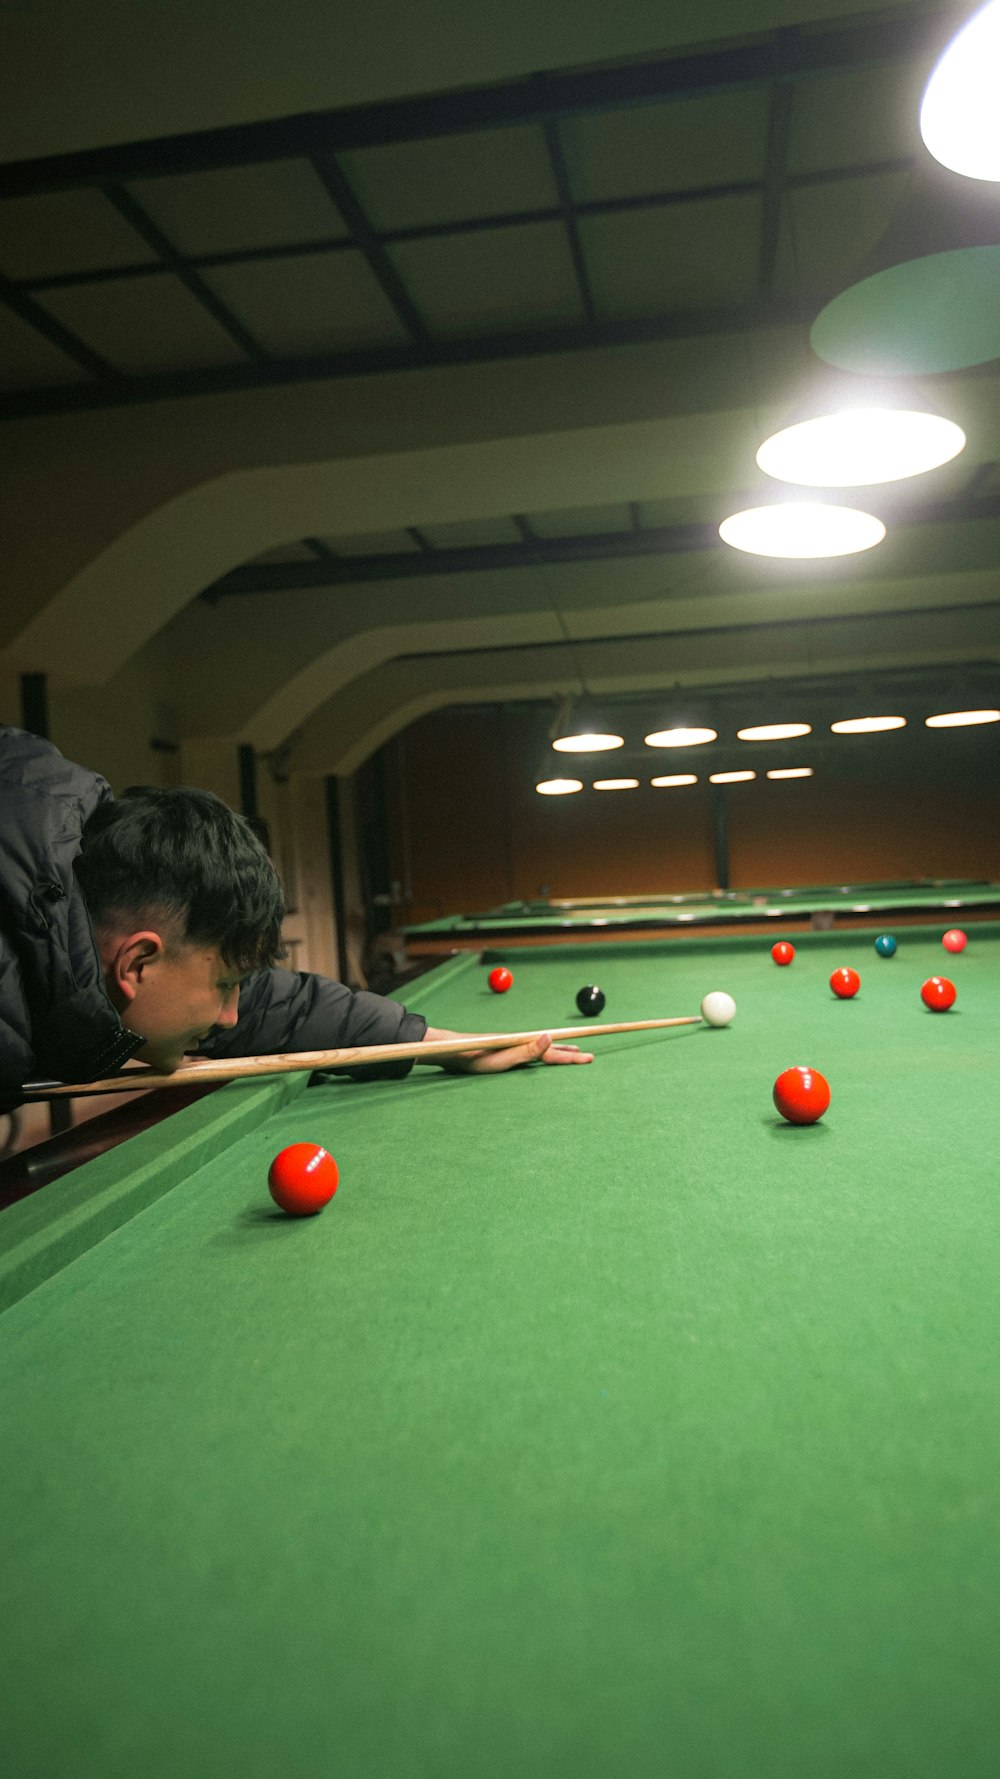 a man is leaning over a pool table